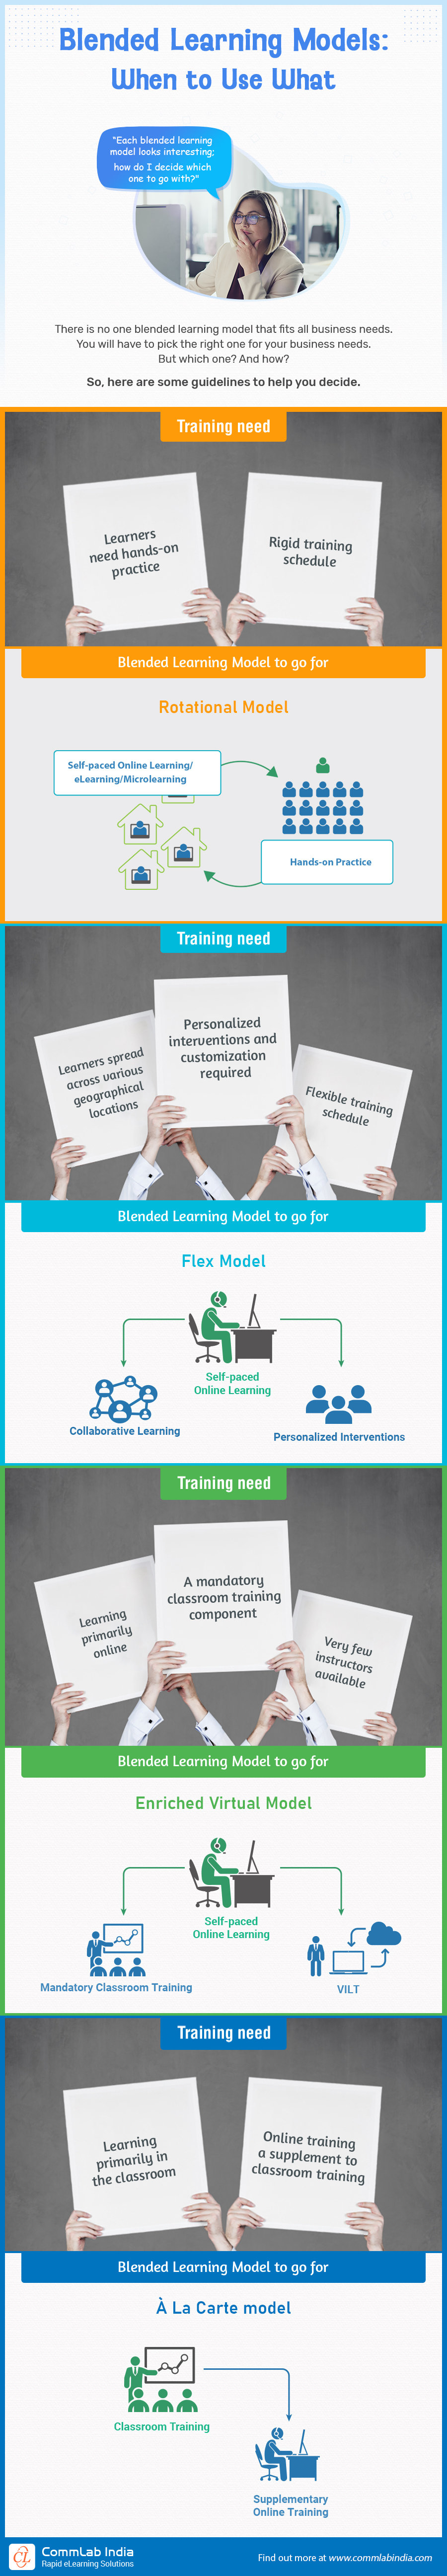 Blended Learning Models: How to Choose the Right Fit?